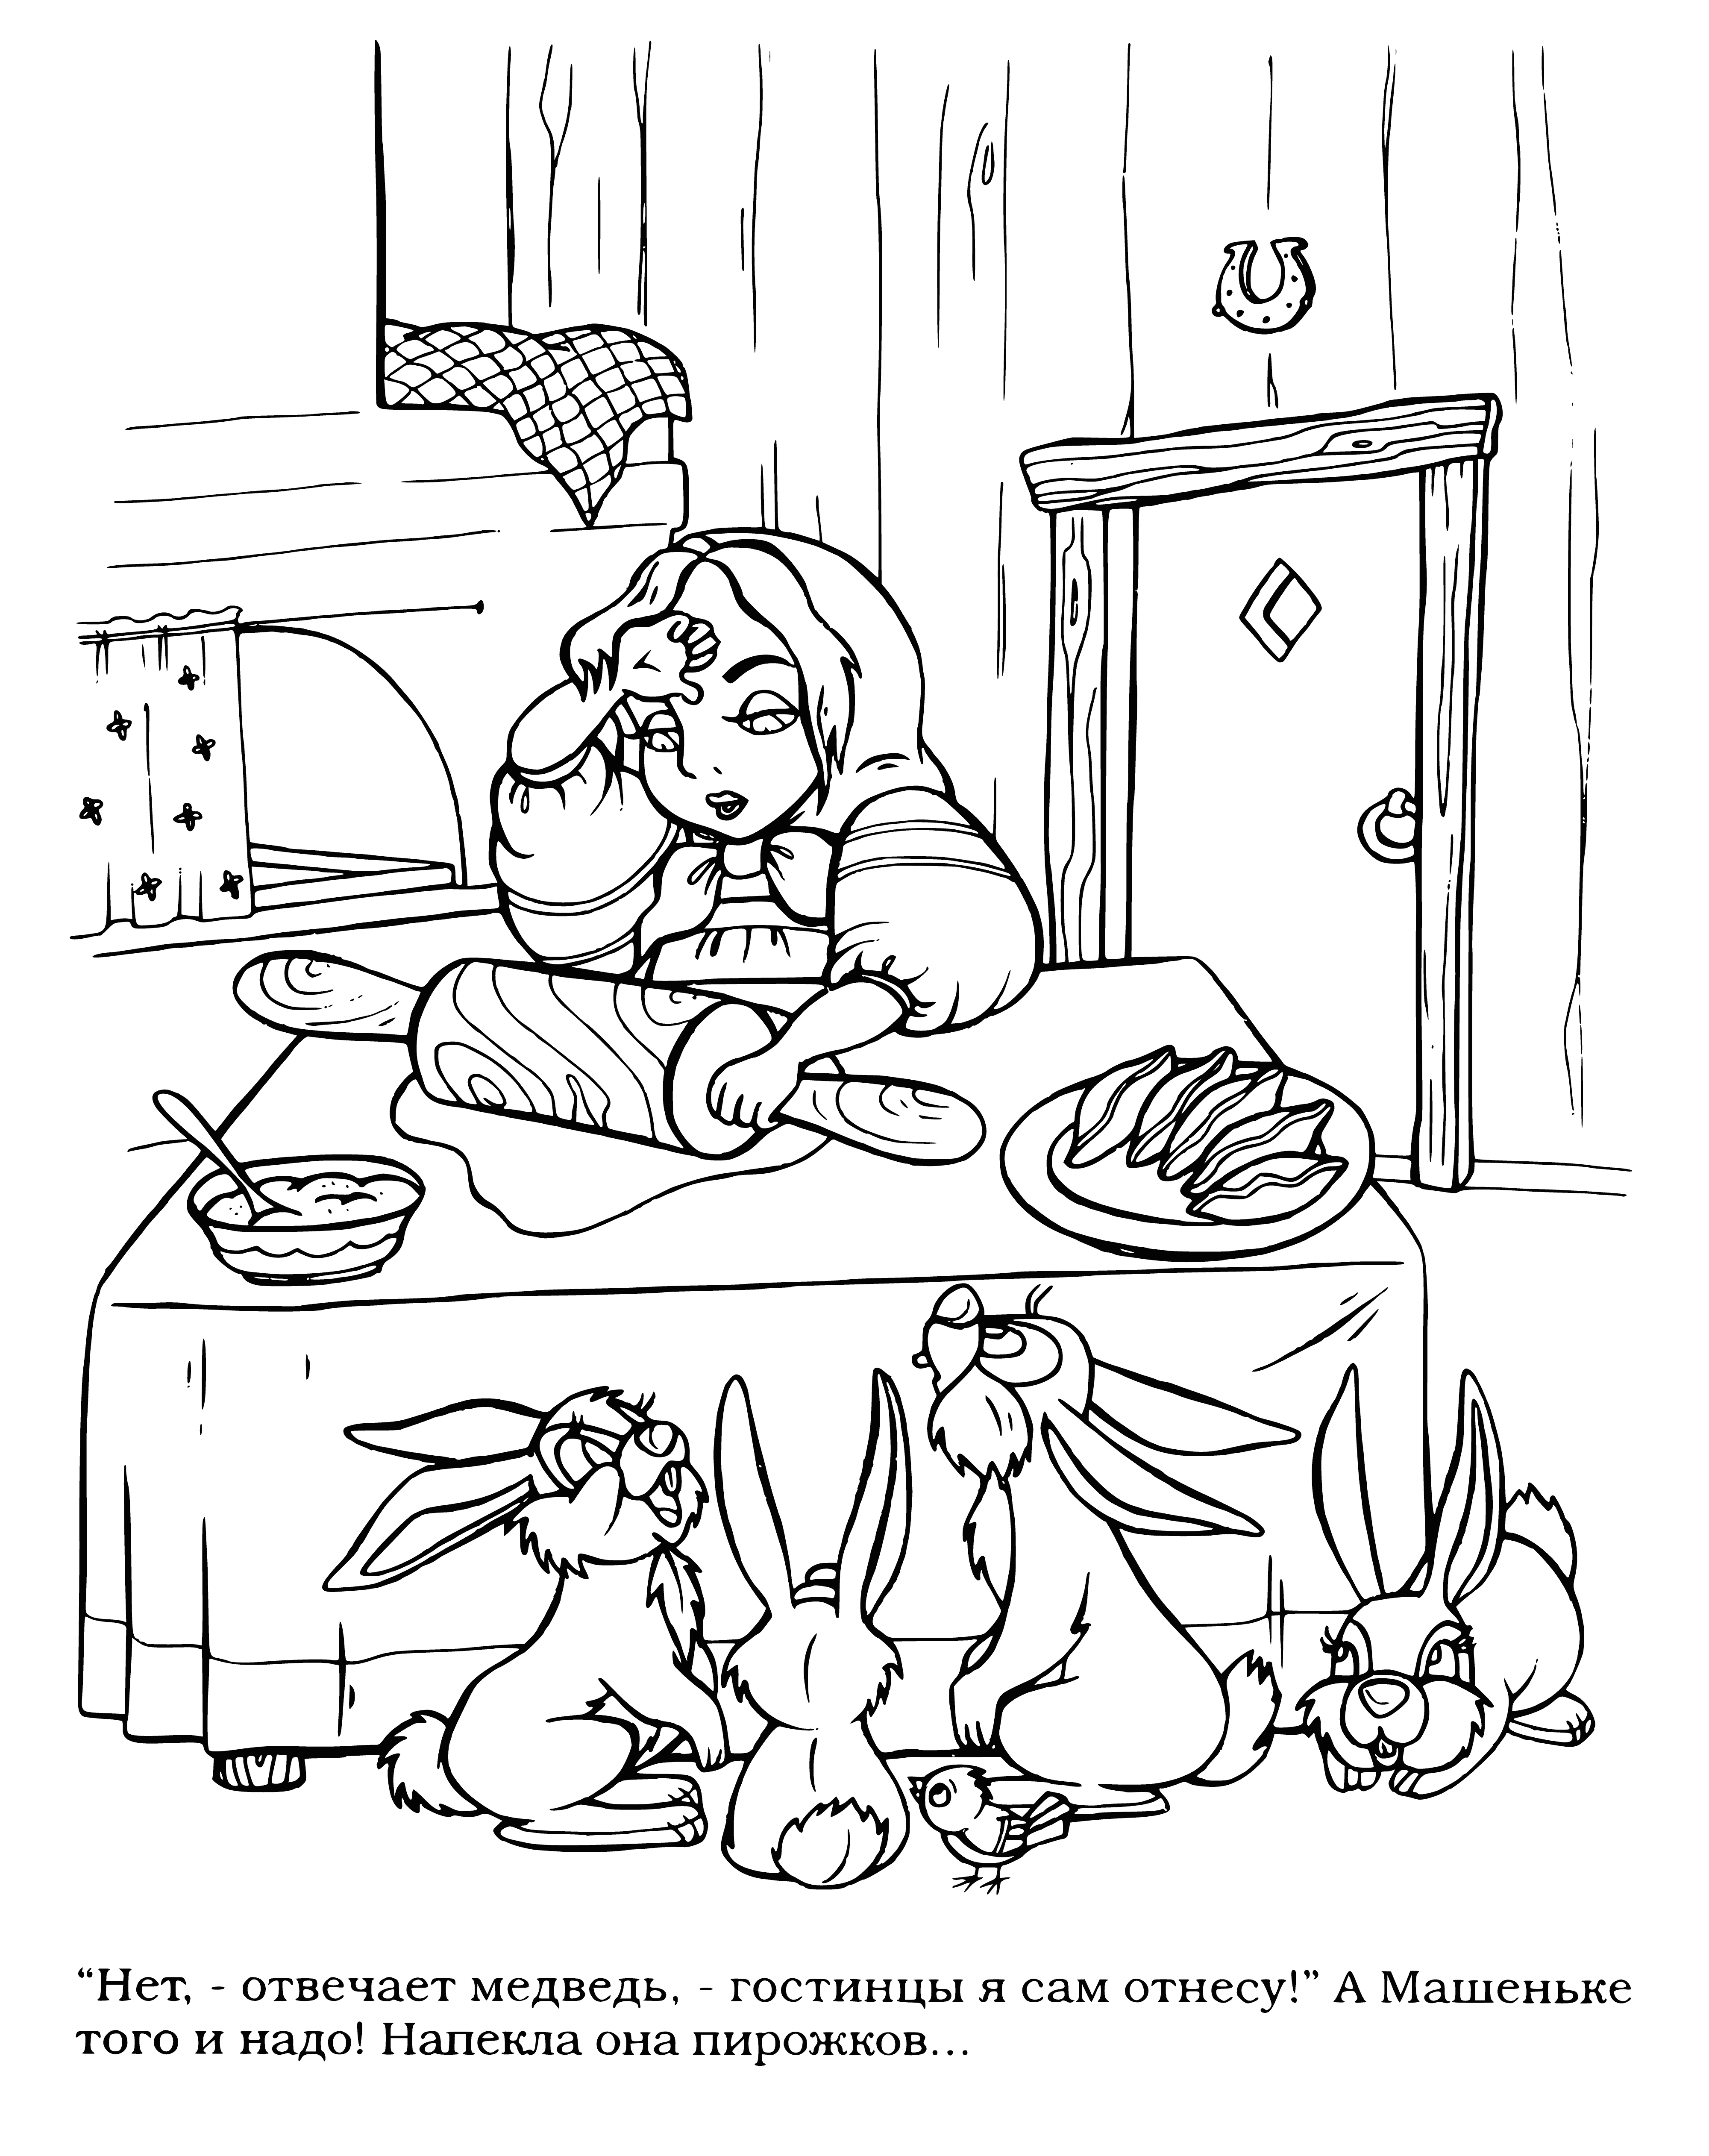 coloring page: Masha bakes amazing pies & is beloved by the villagers - they always buy them when she has them for sale.